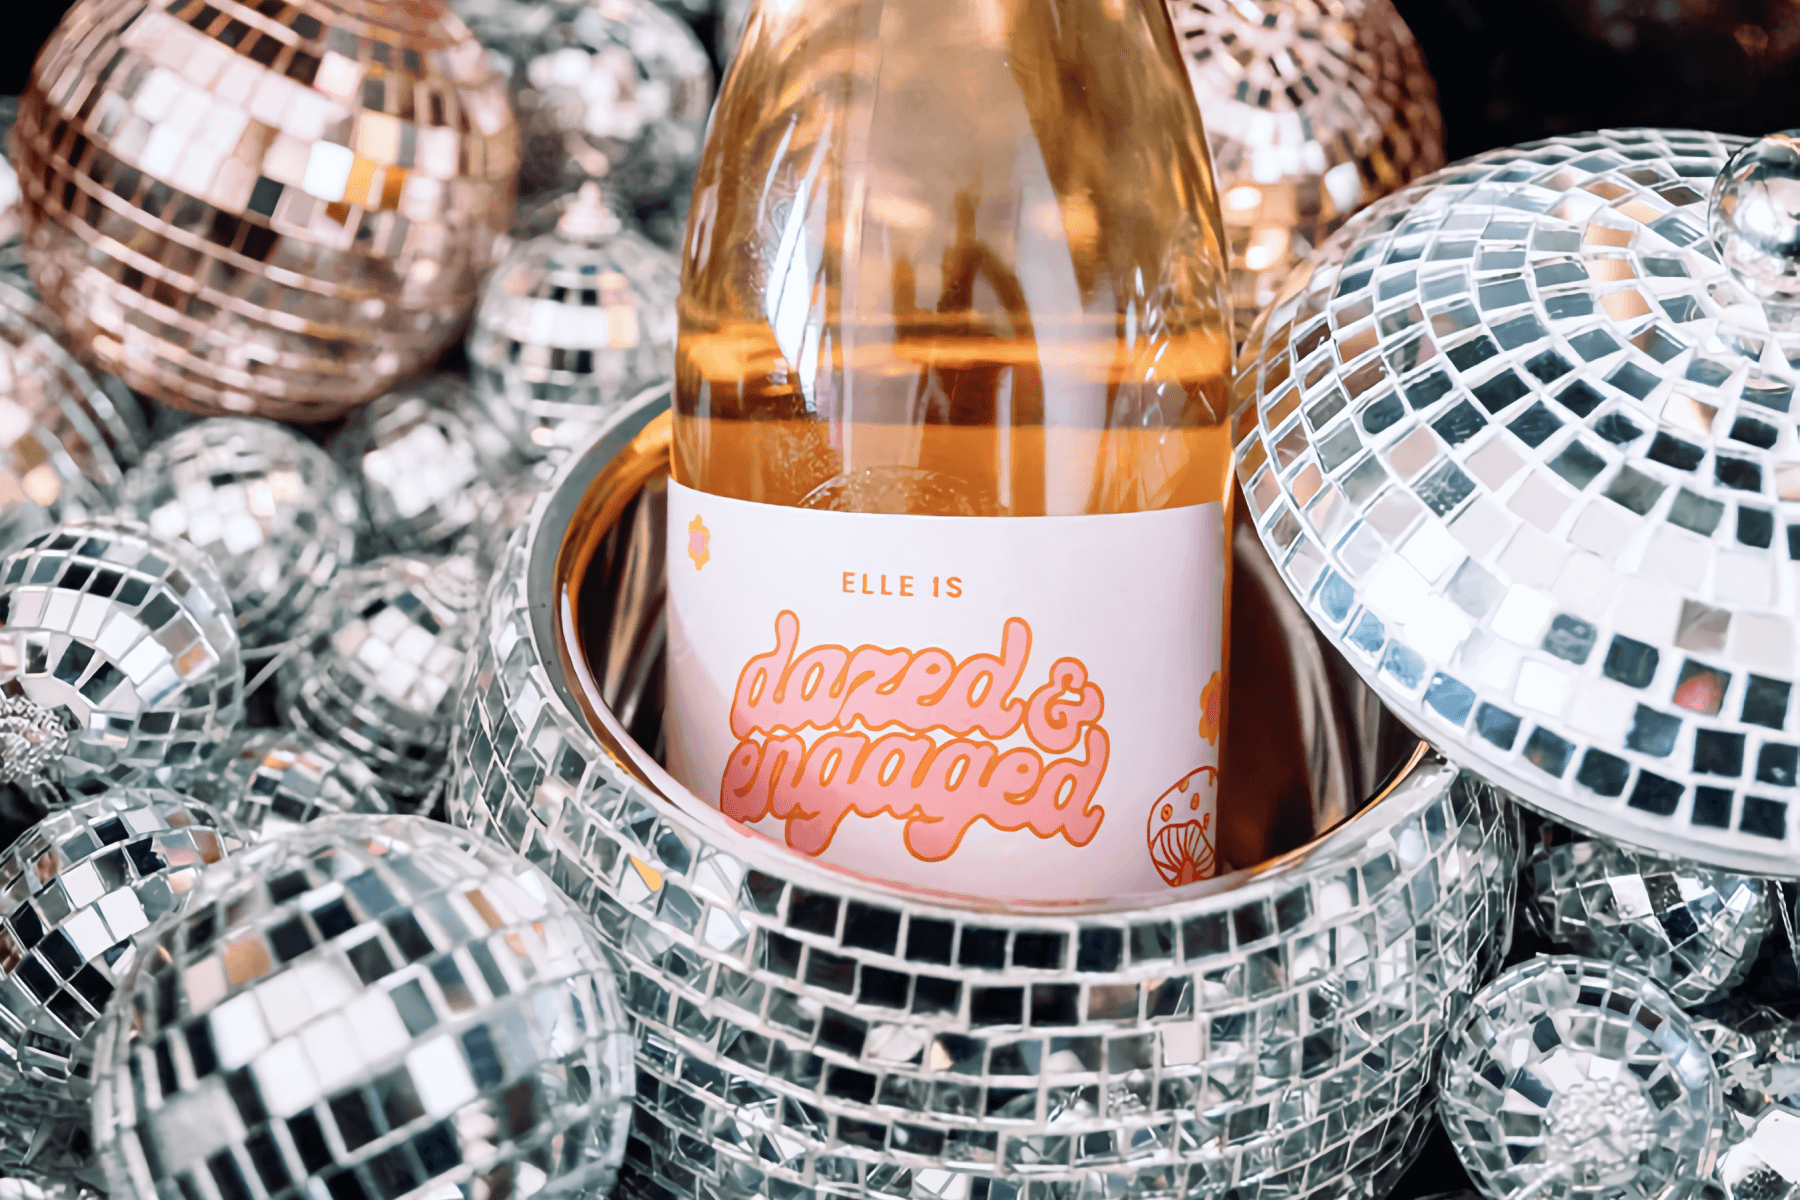 A bottle or rosé wine sits in an open disco ball surrounded by smaller disco balls.